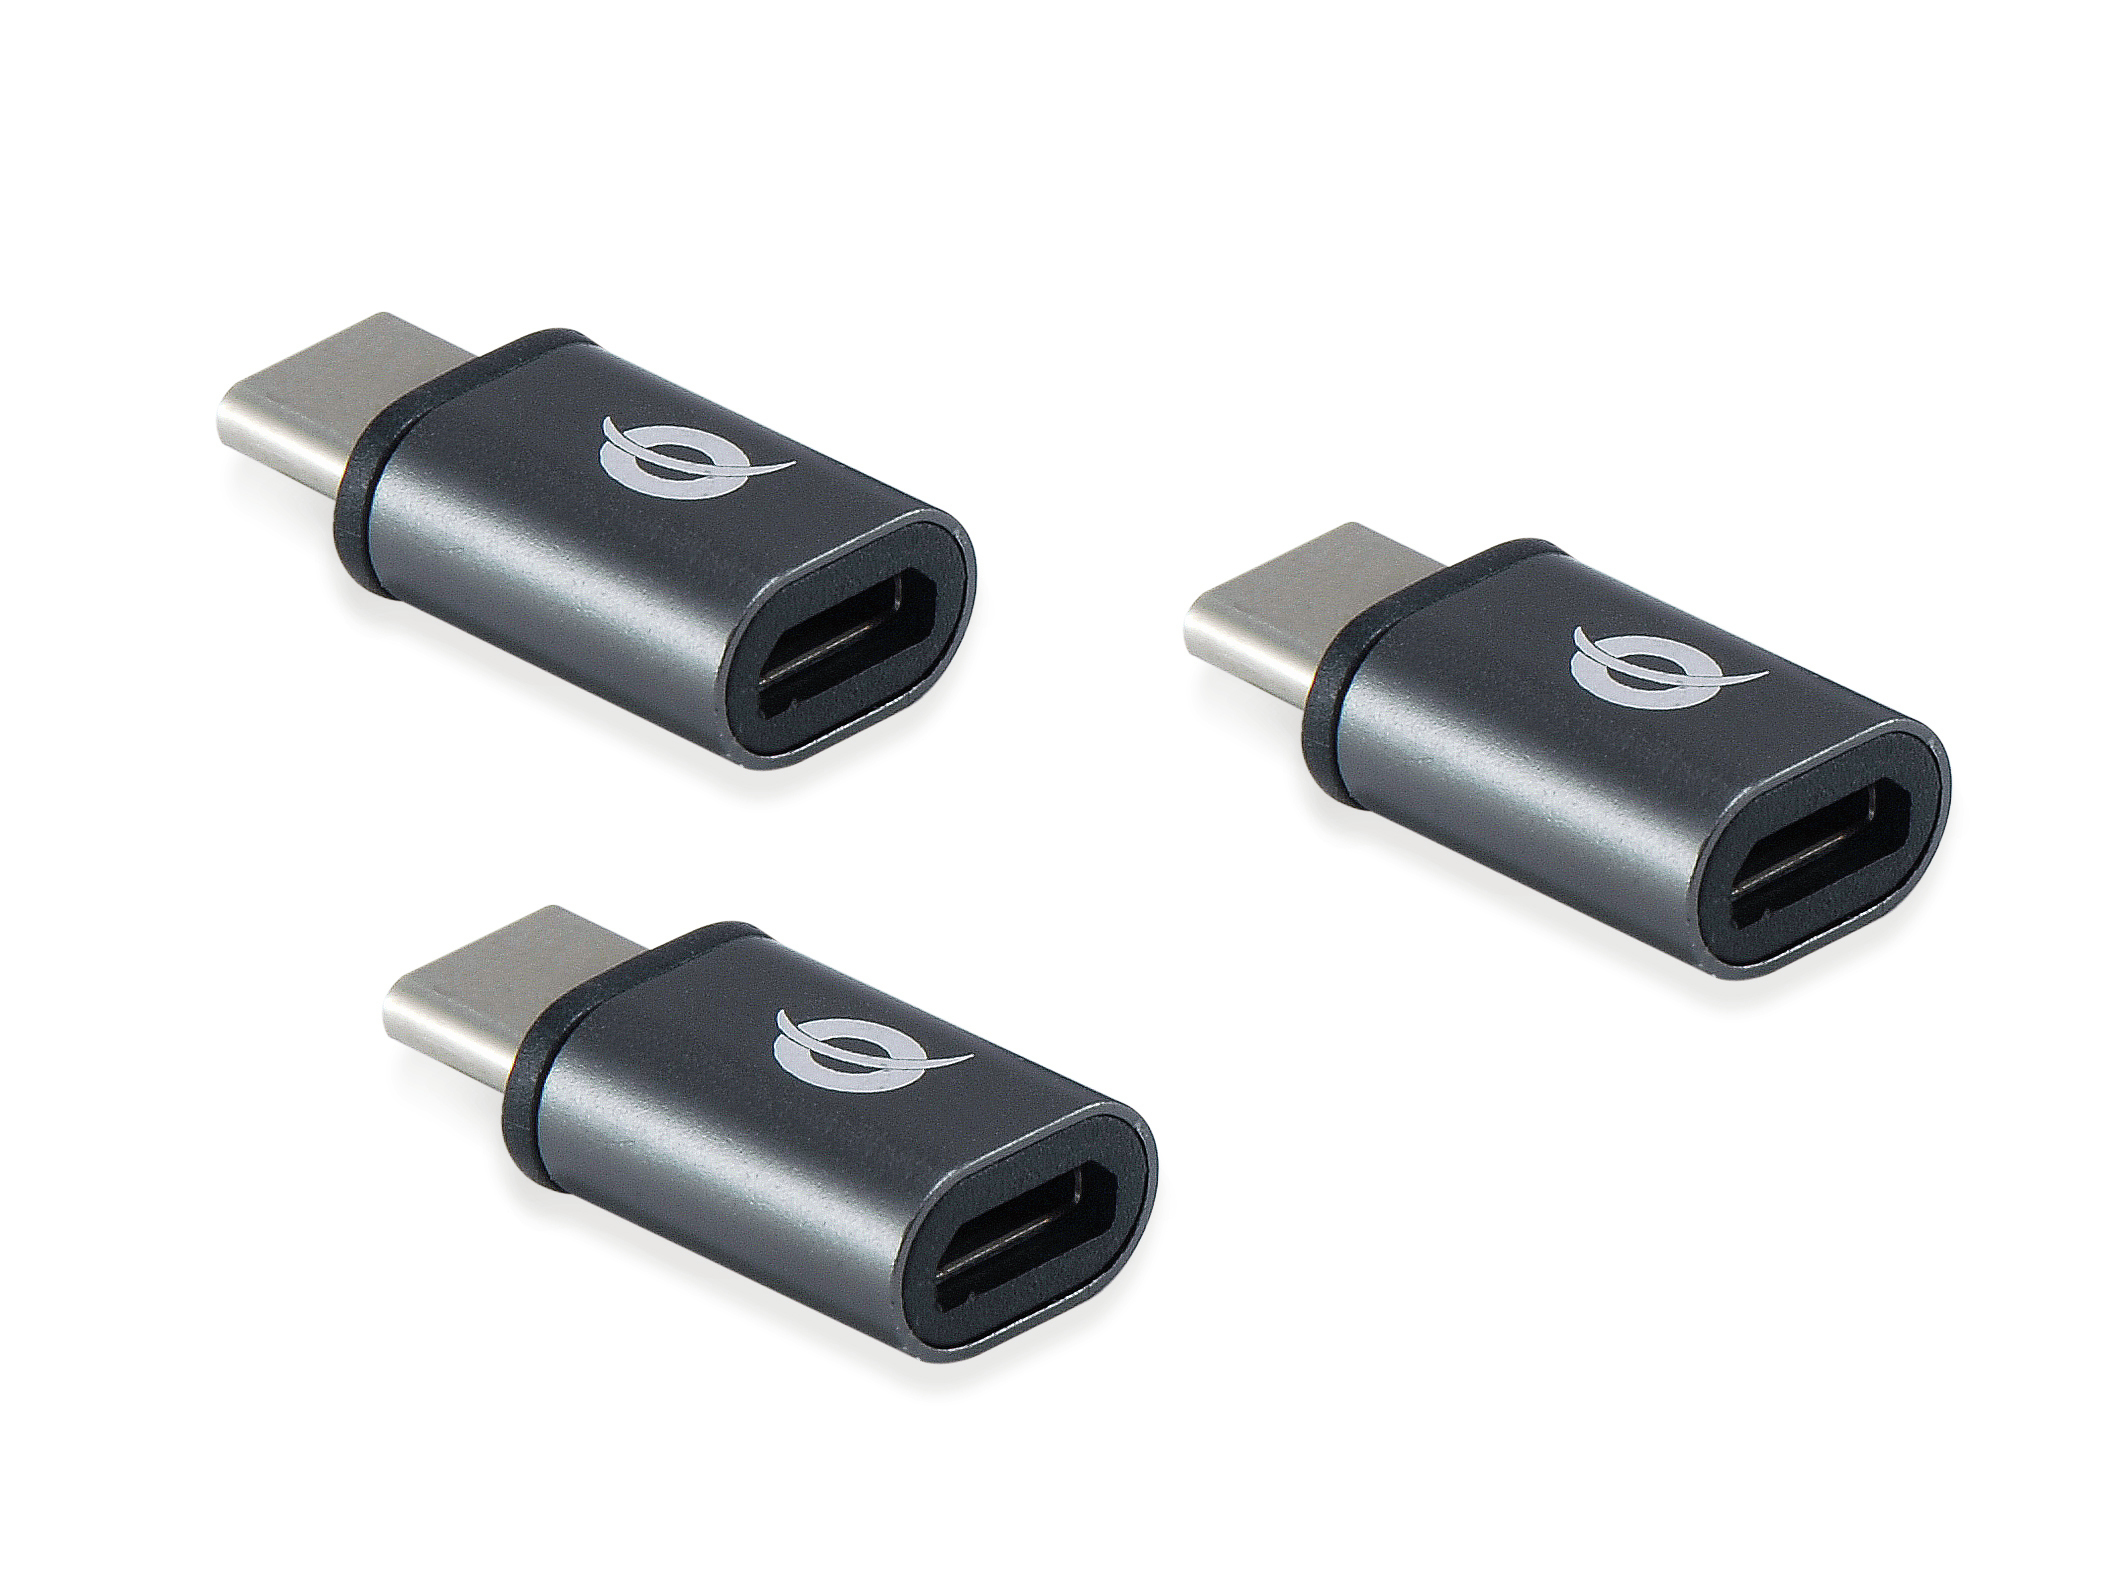 CONCEPTRONIC Adapter USB-C -> Micro USB 3.0 3er-Pack gr